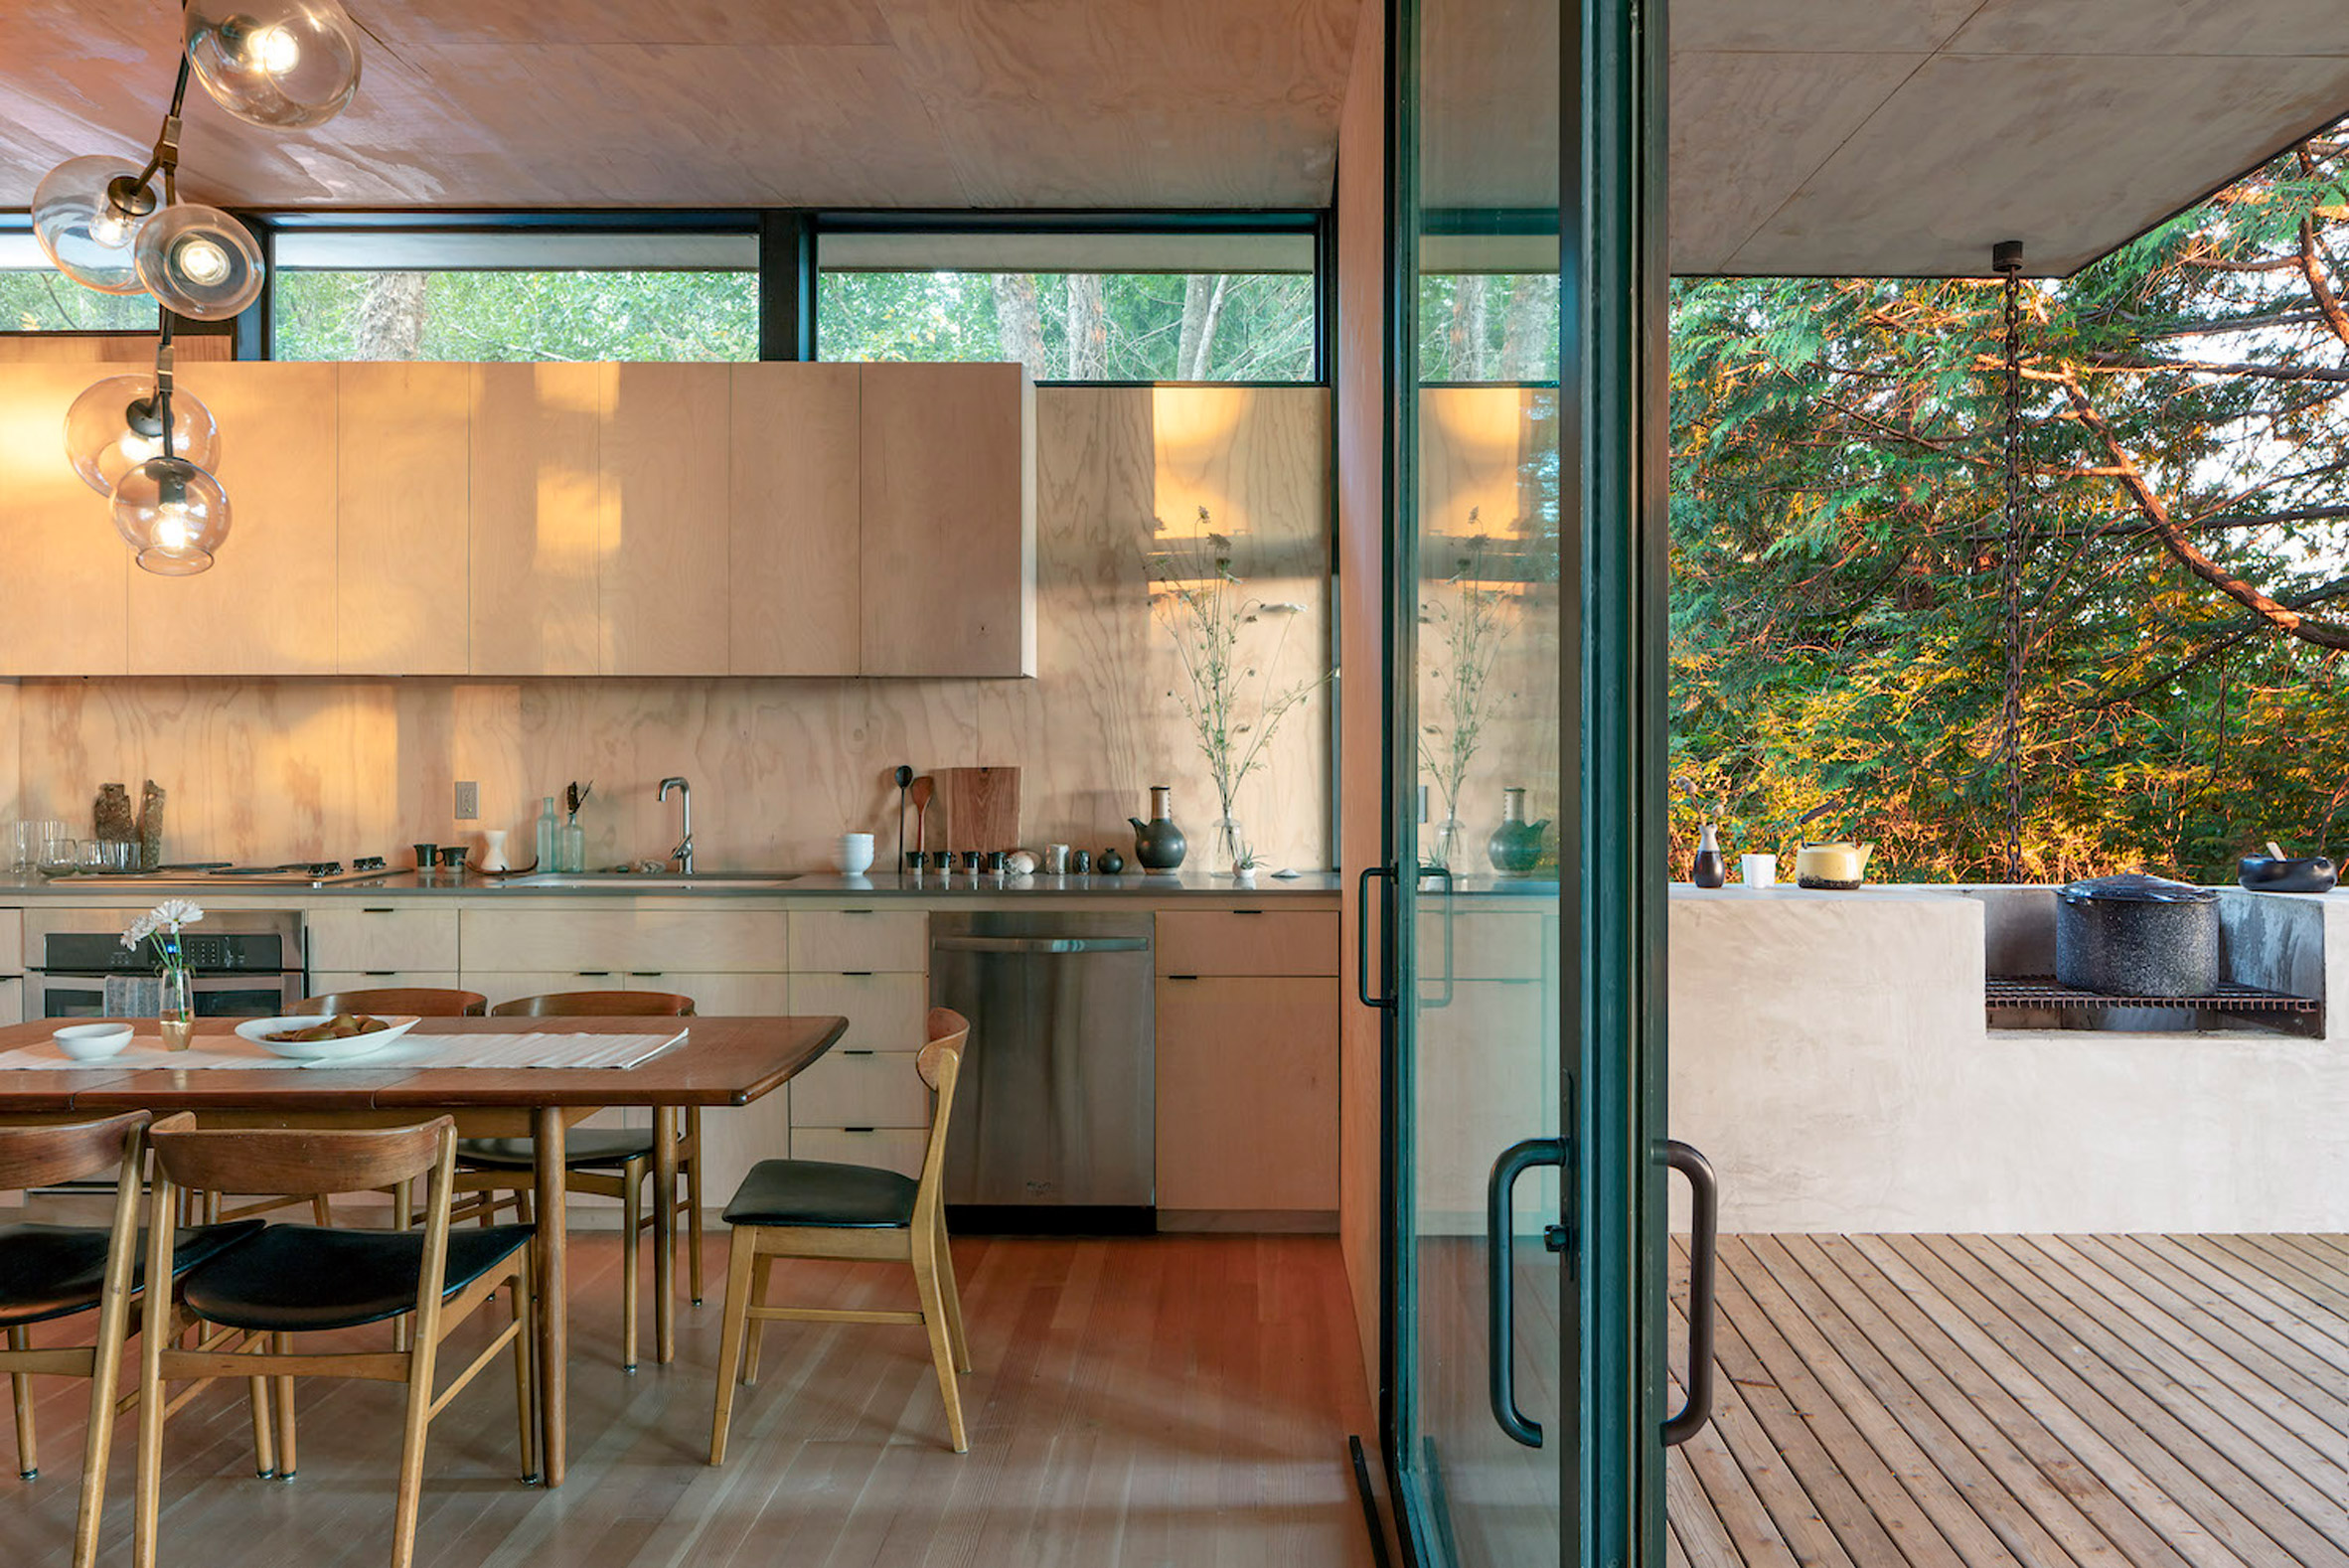 Kitchen with pass-through window onto outdoor grill deck